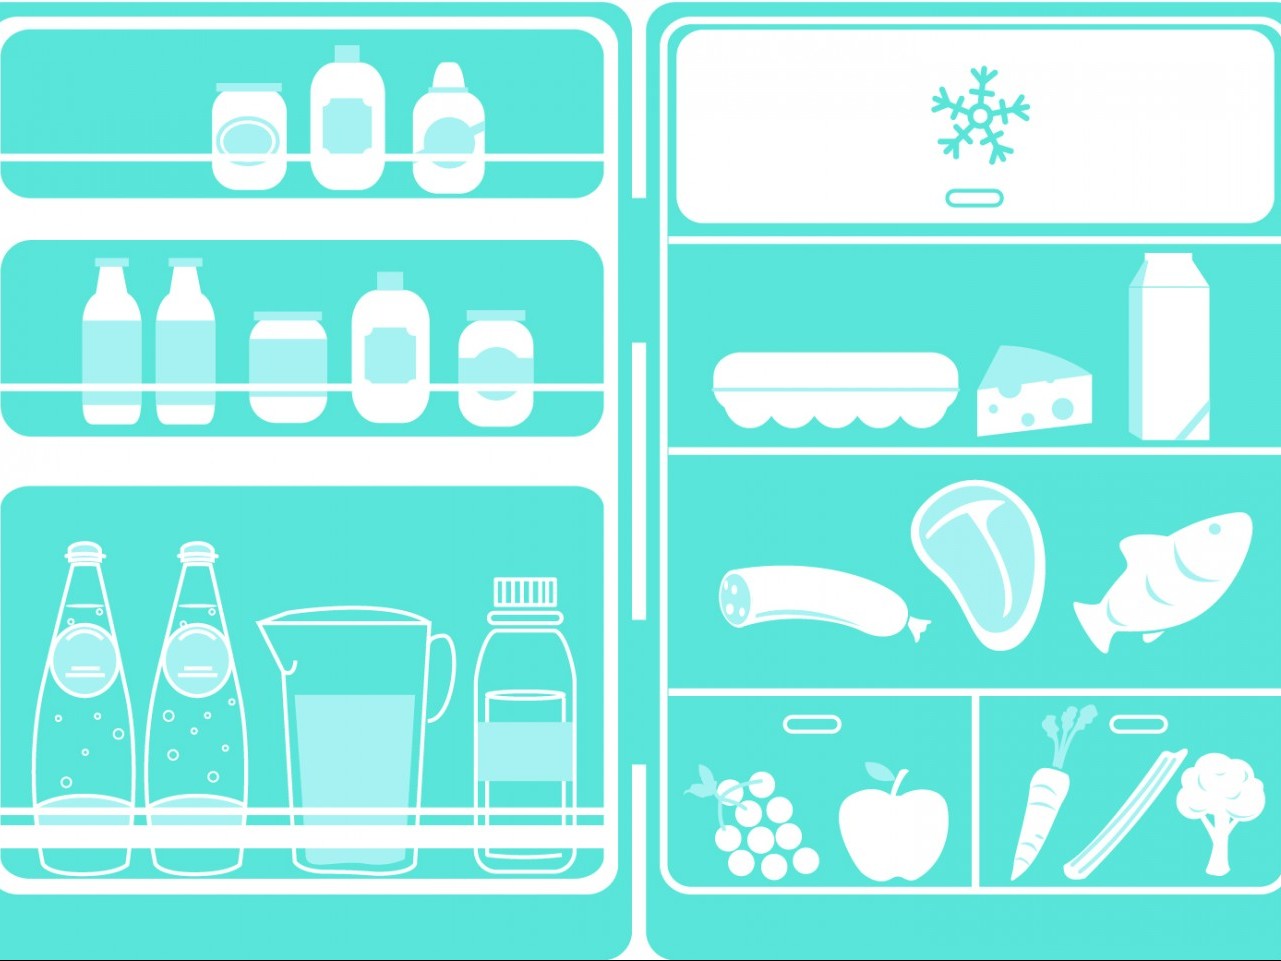 foods that shouldn’t go in the refrigerator: Illustrated fridge with bottles, meat, vegetables, eggs and fish inside